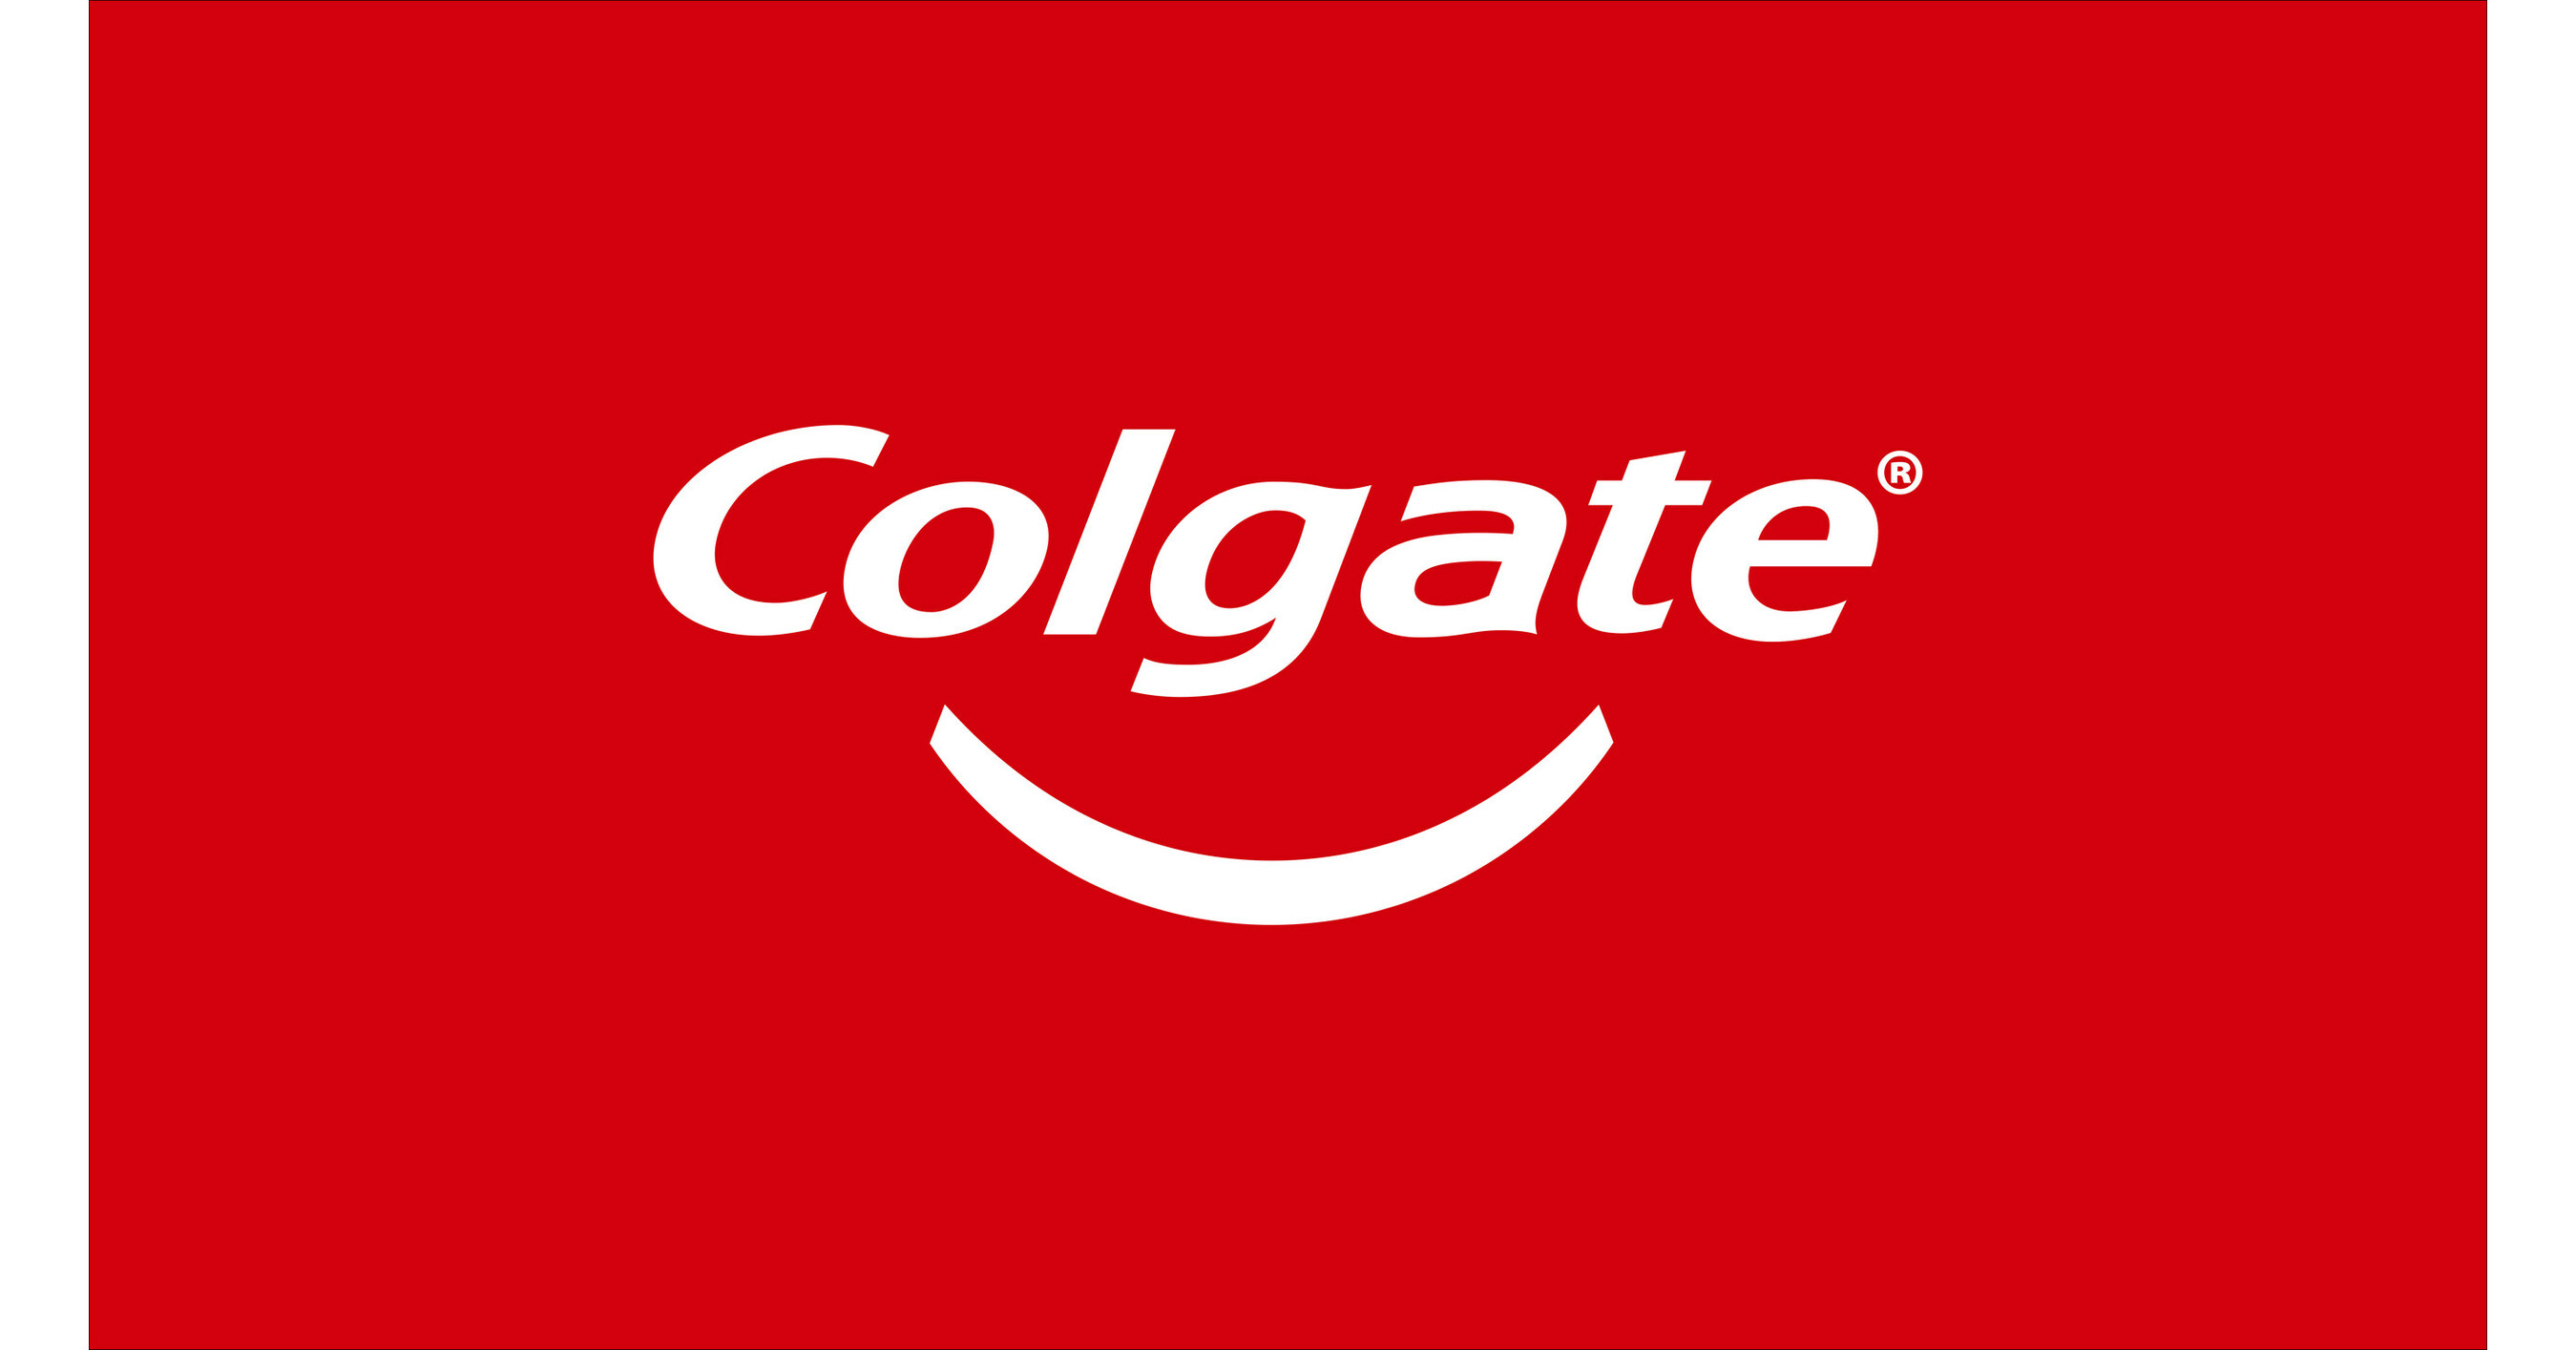 Colgate-Palmolive (India) champions workplace equity with a robust policy for persons with disabilities